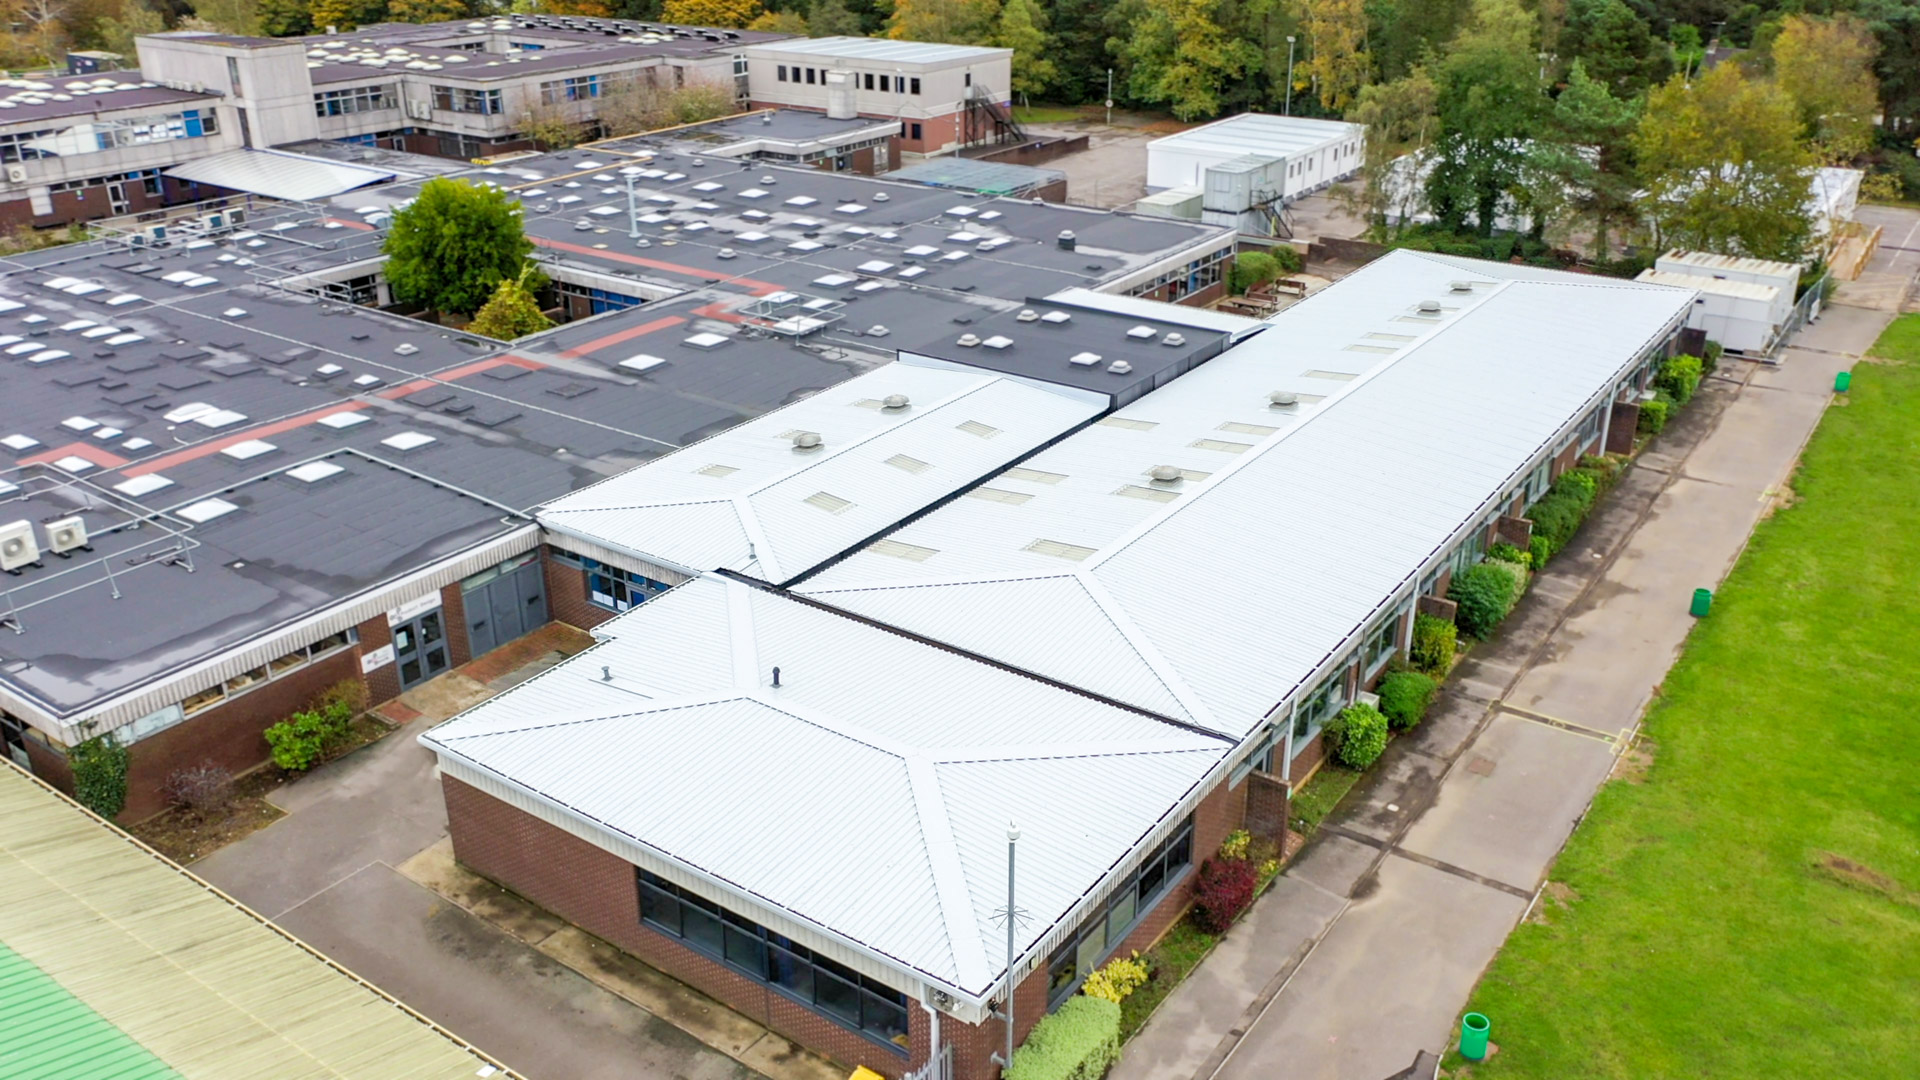 education replacement roof scheme including metal membranes and liquid systems funded through the condition improvement fund